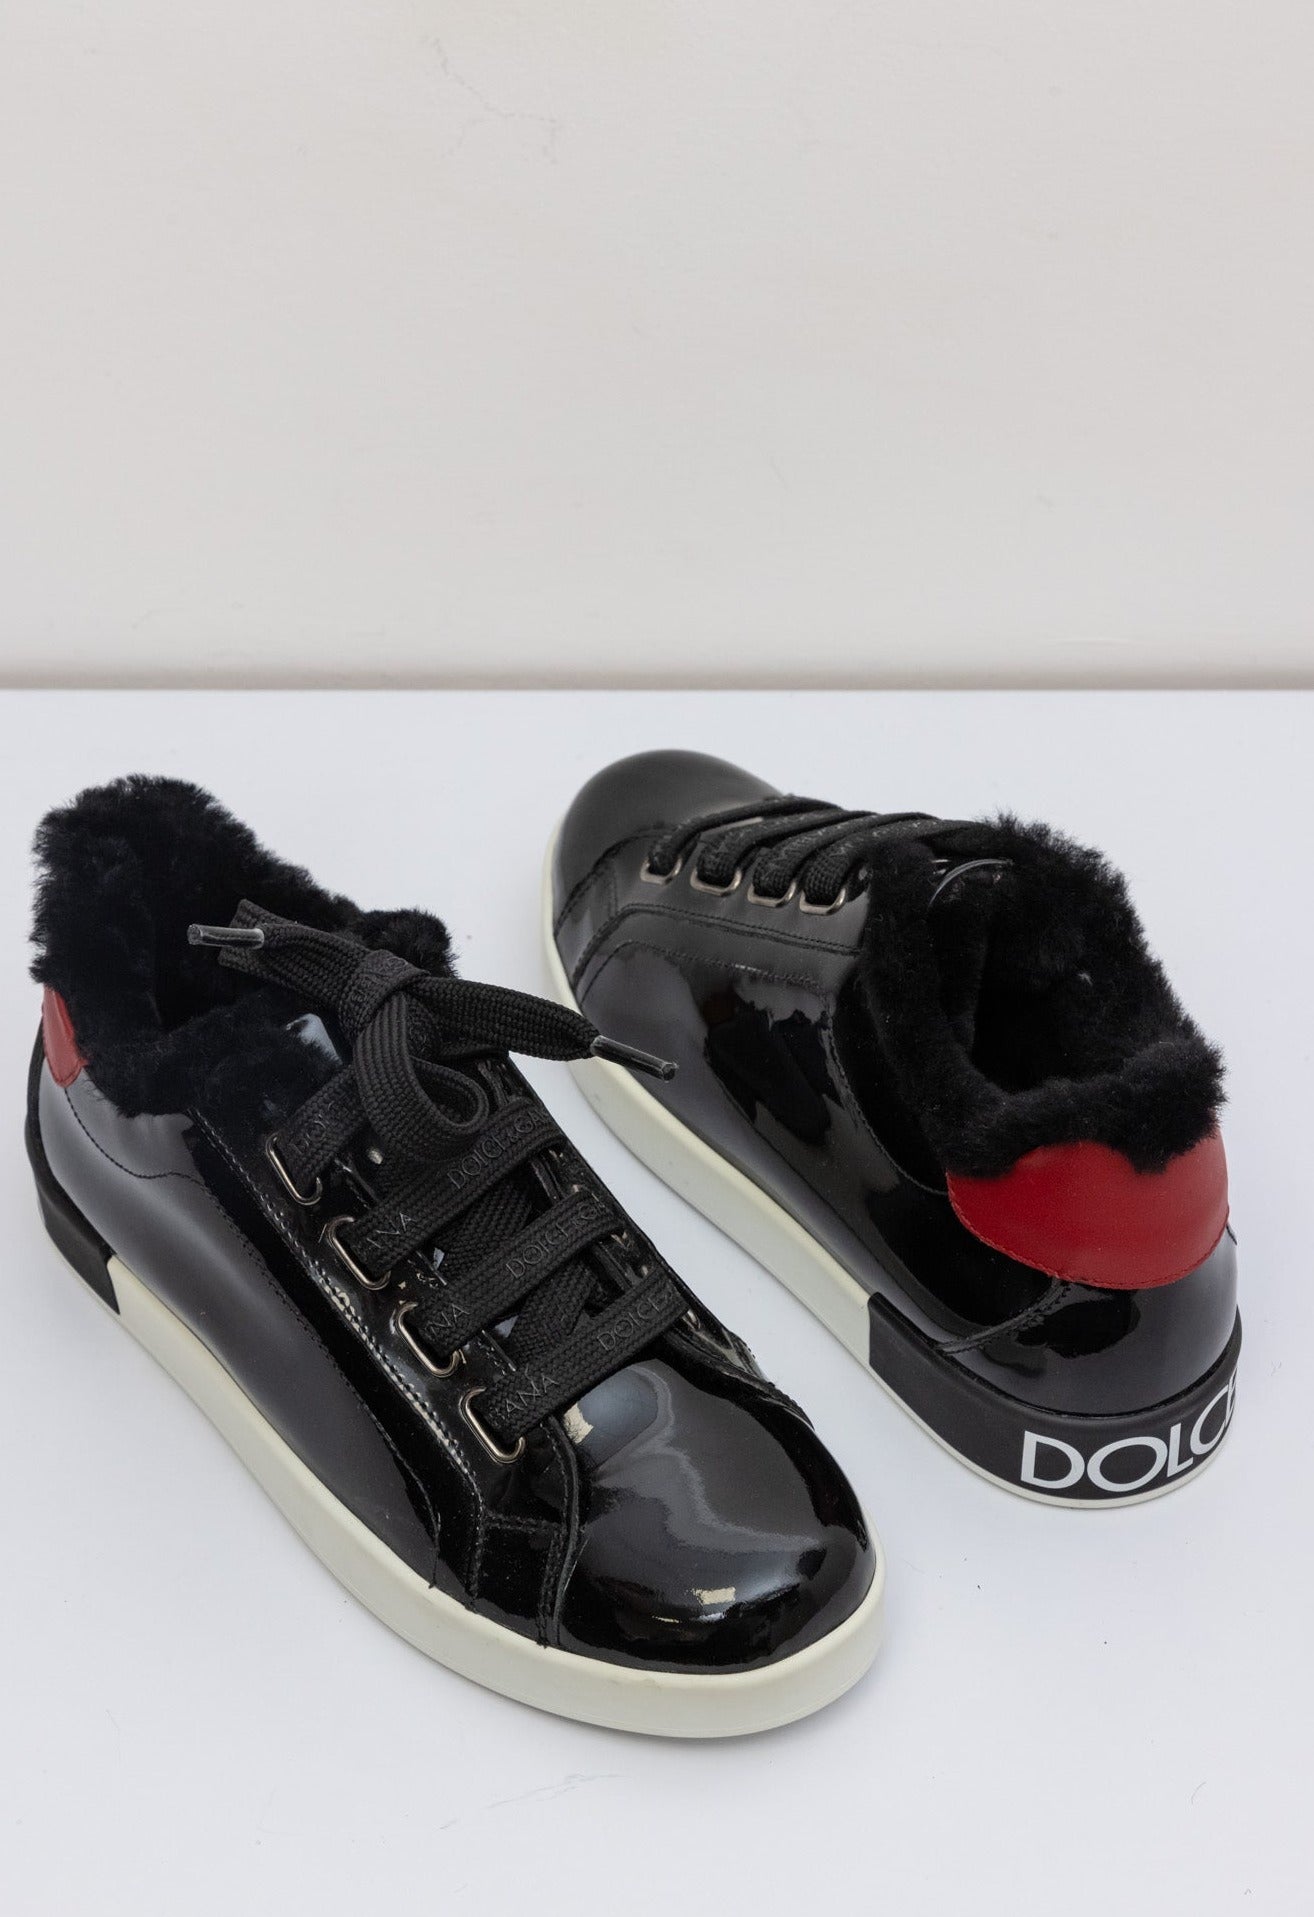 DOLCE & GABBANA Patent Leather Sneakers with Lamb Fur | IT 38 | Made in Italy